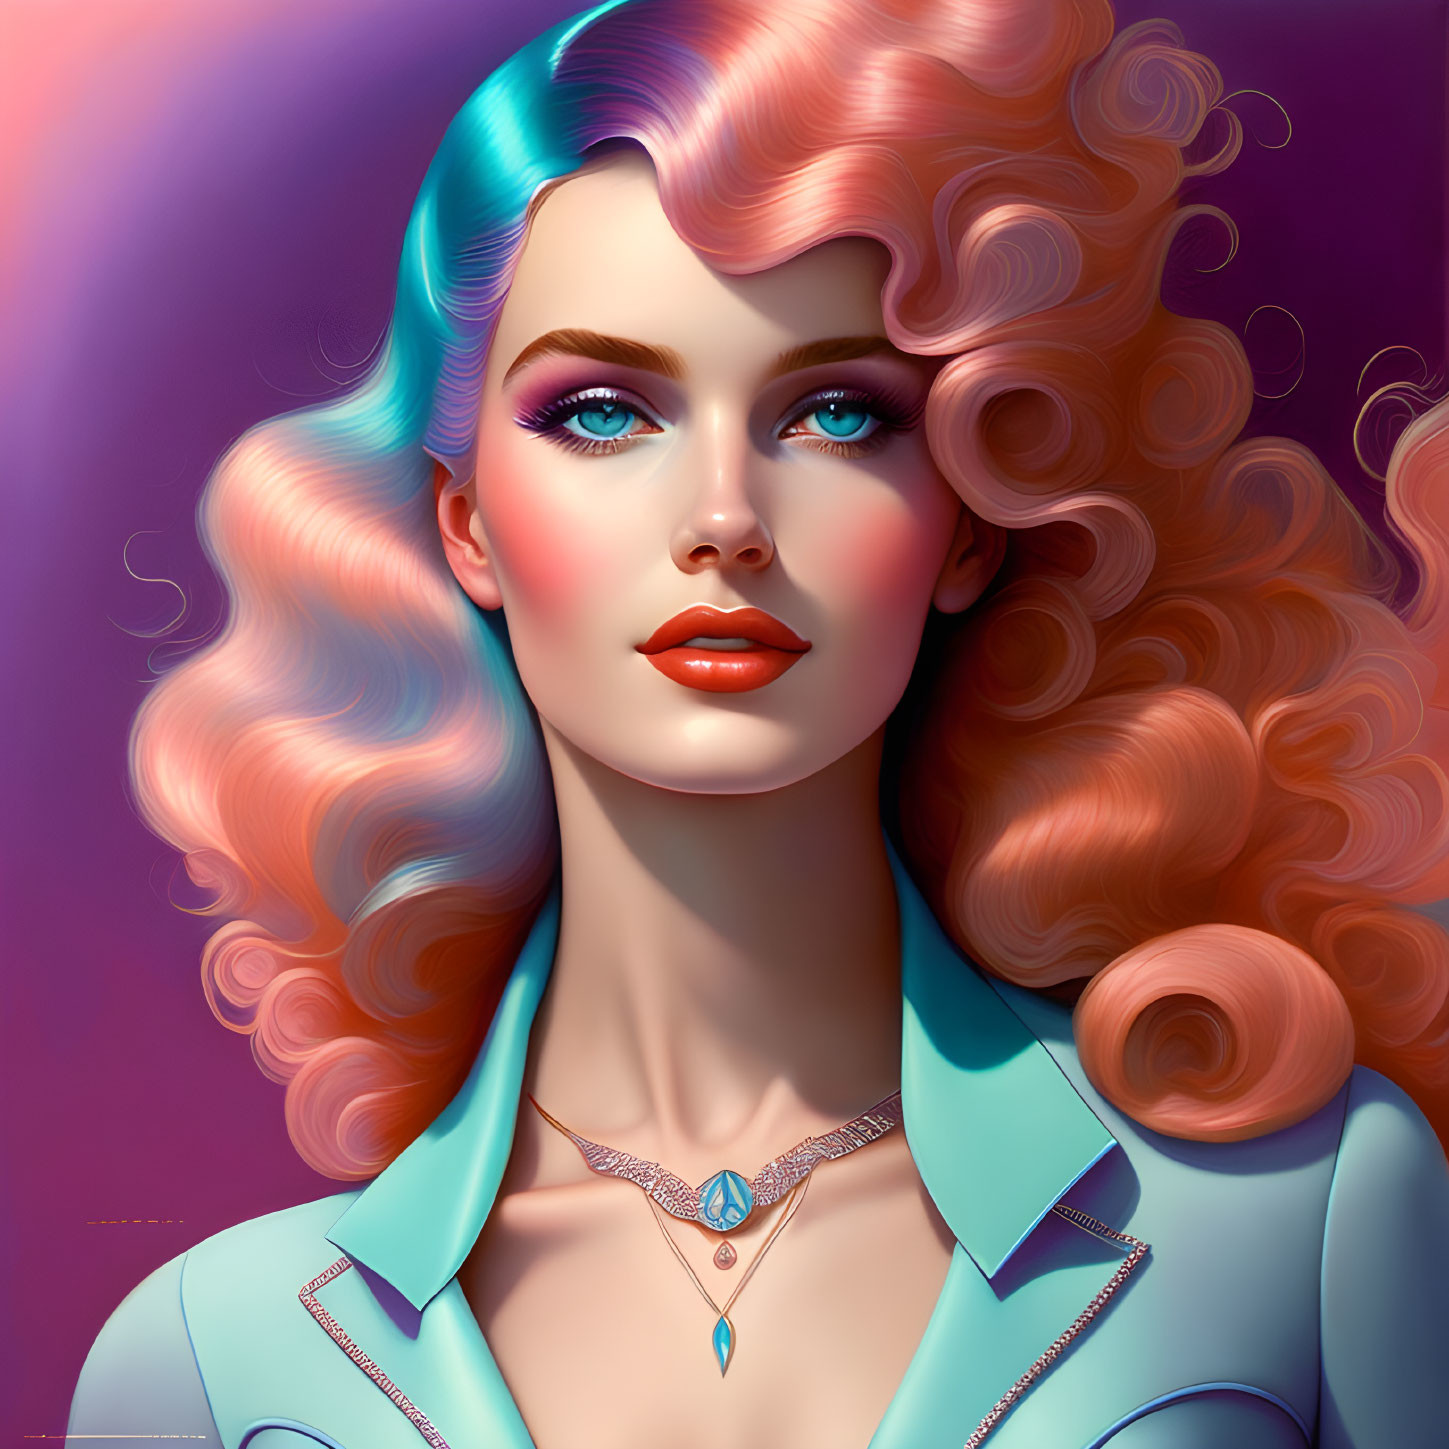 Digital portrait of woman with pastel hair and turquoise outfit